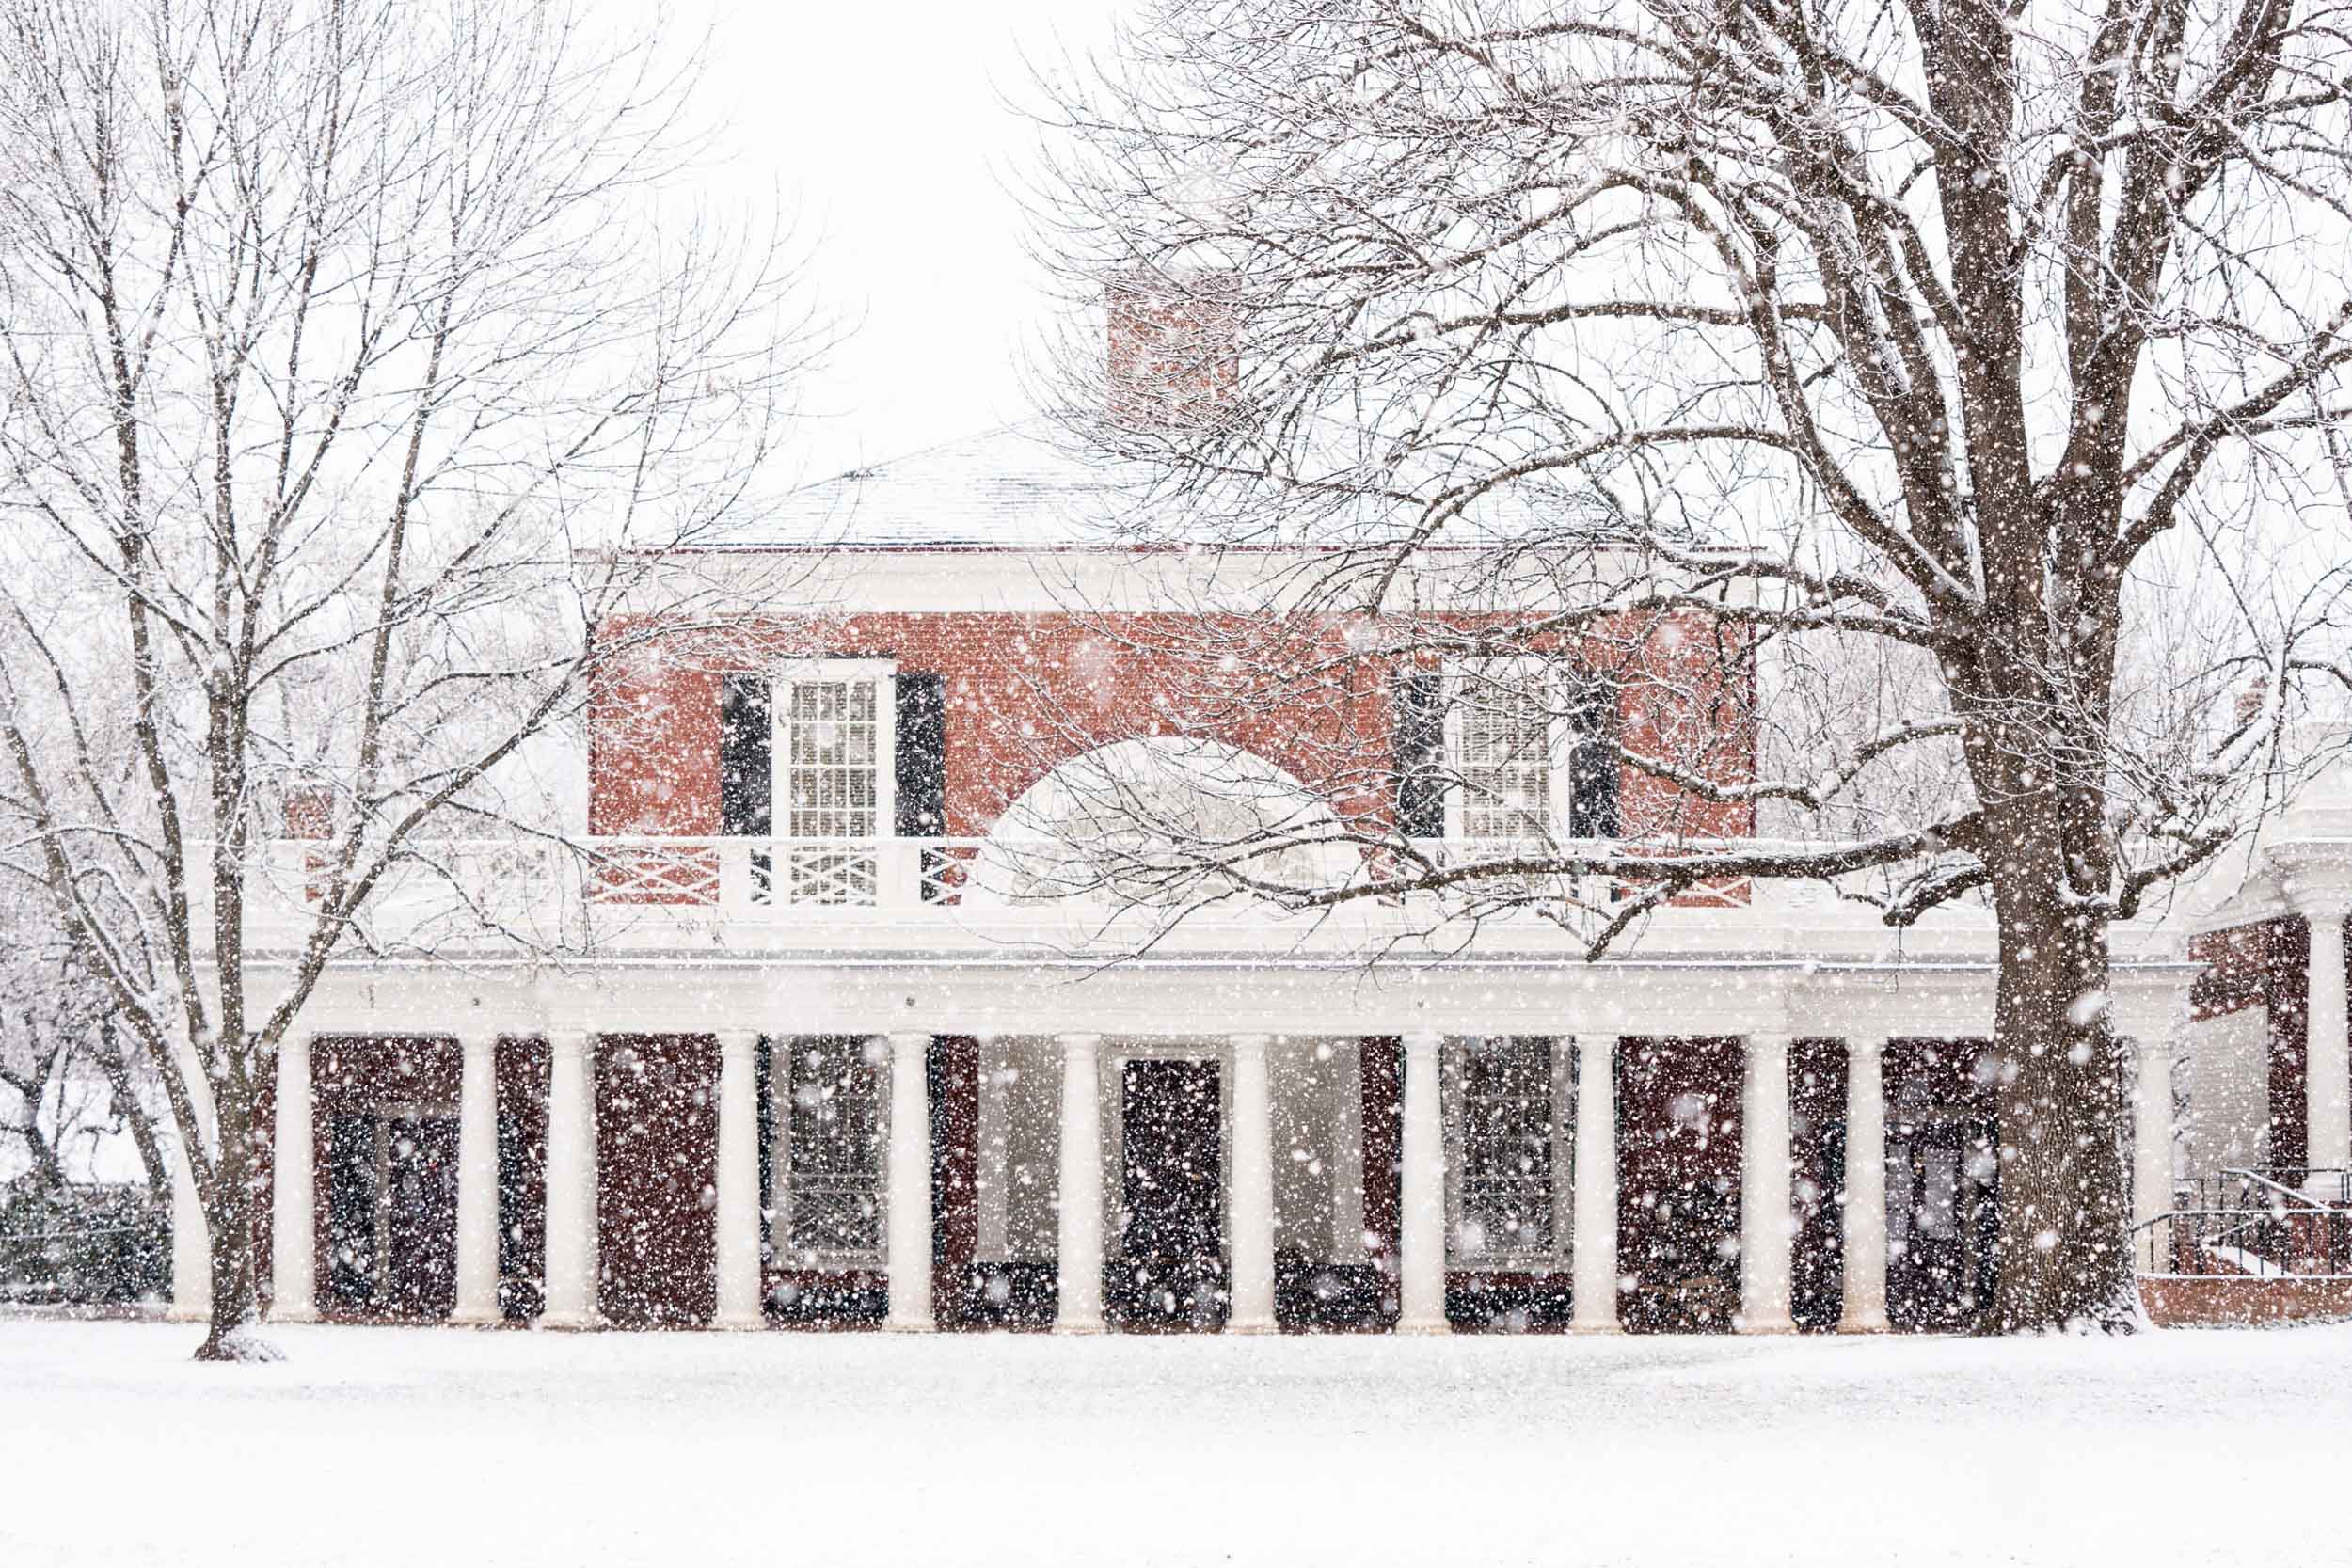 Building on the Lawn during the snow